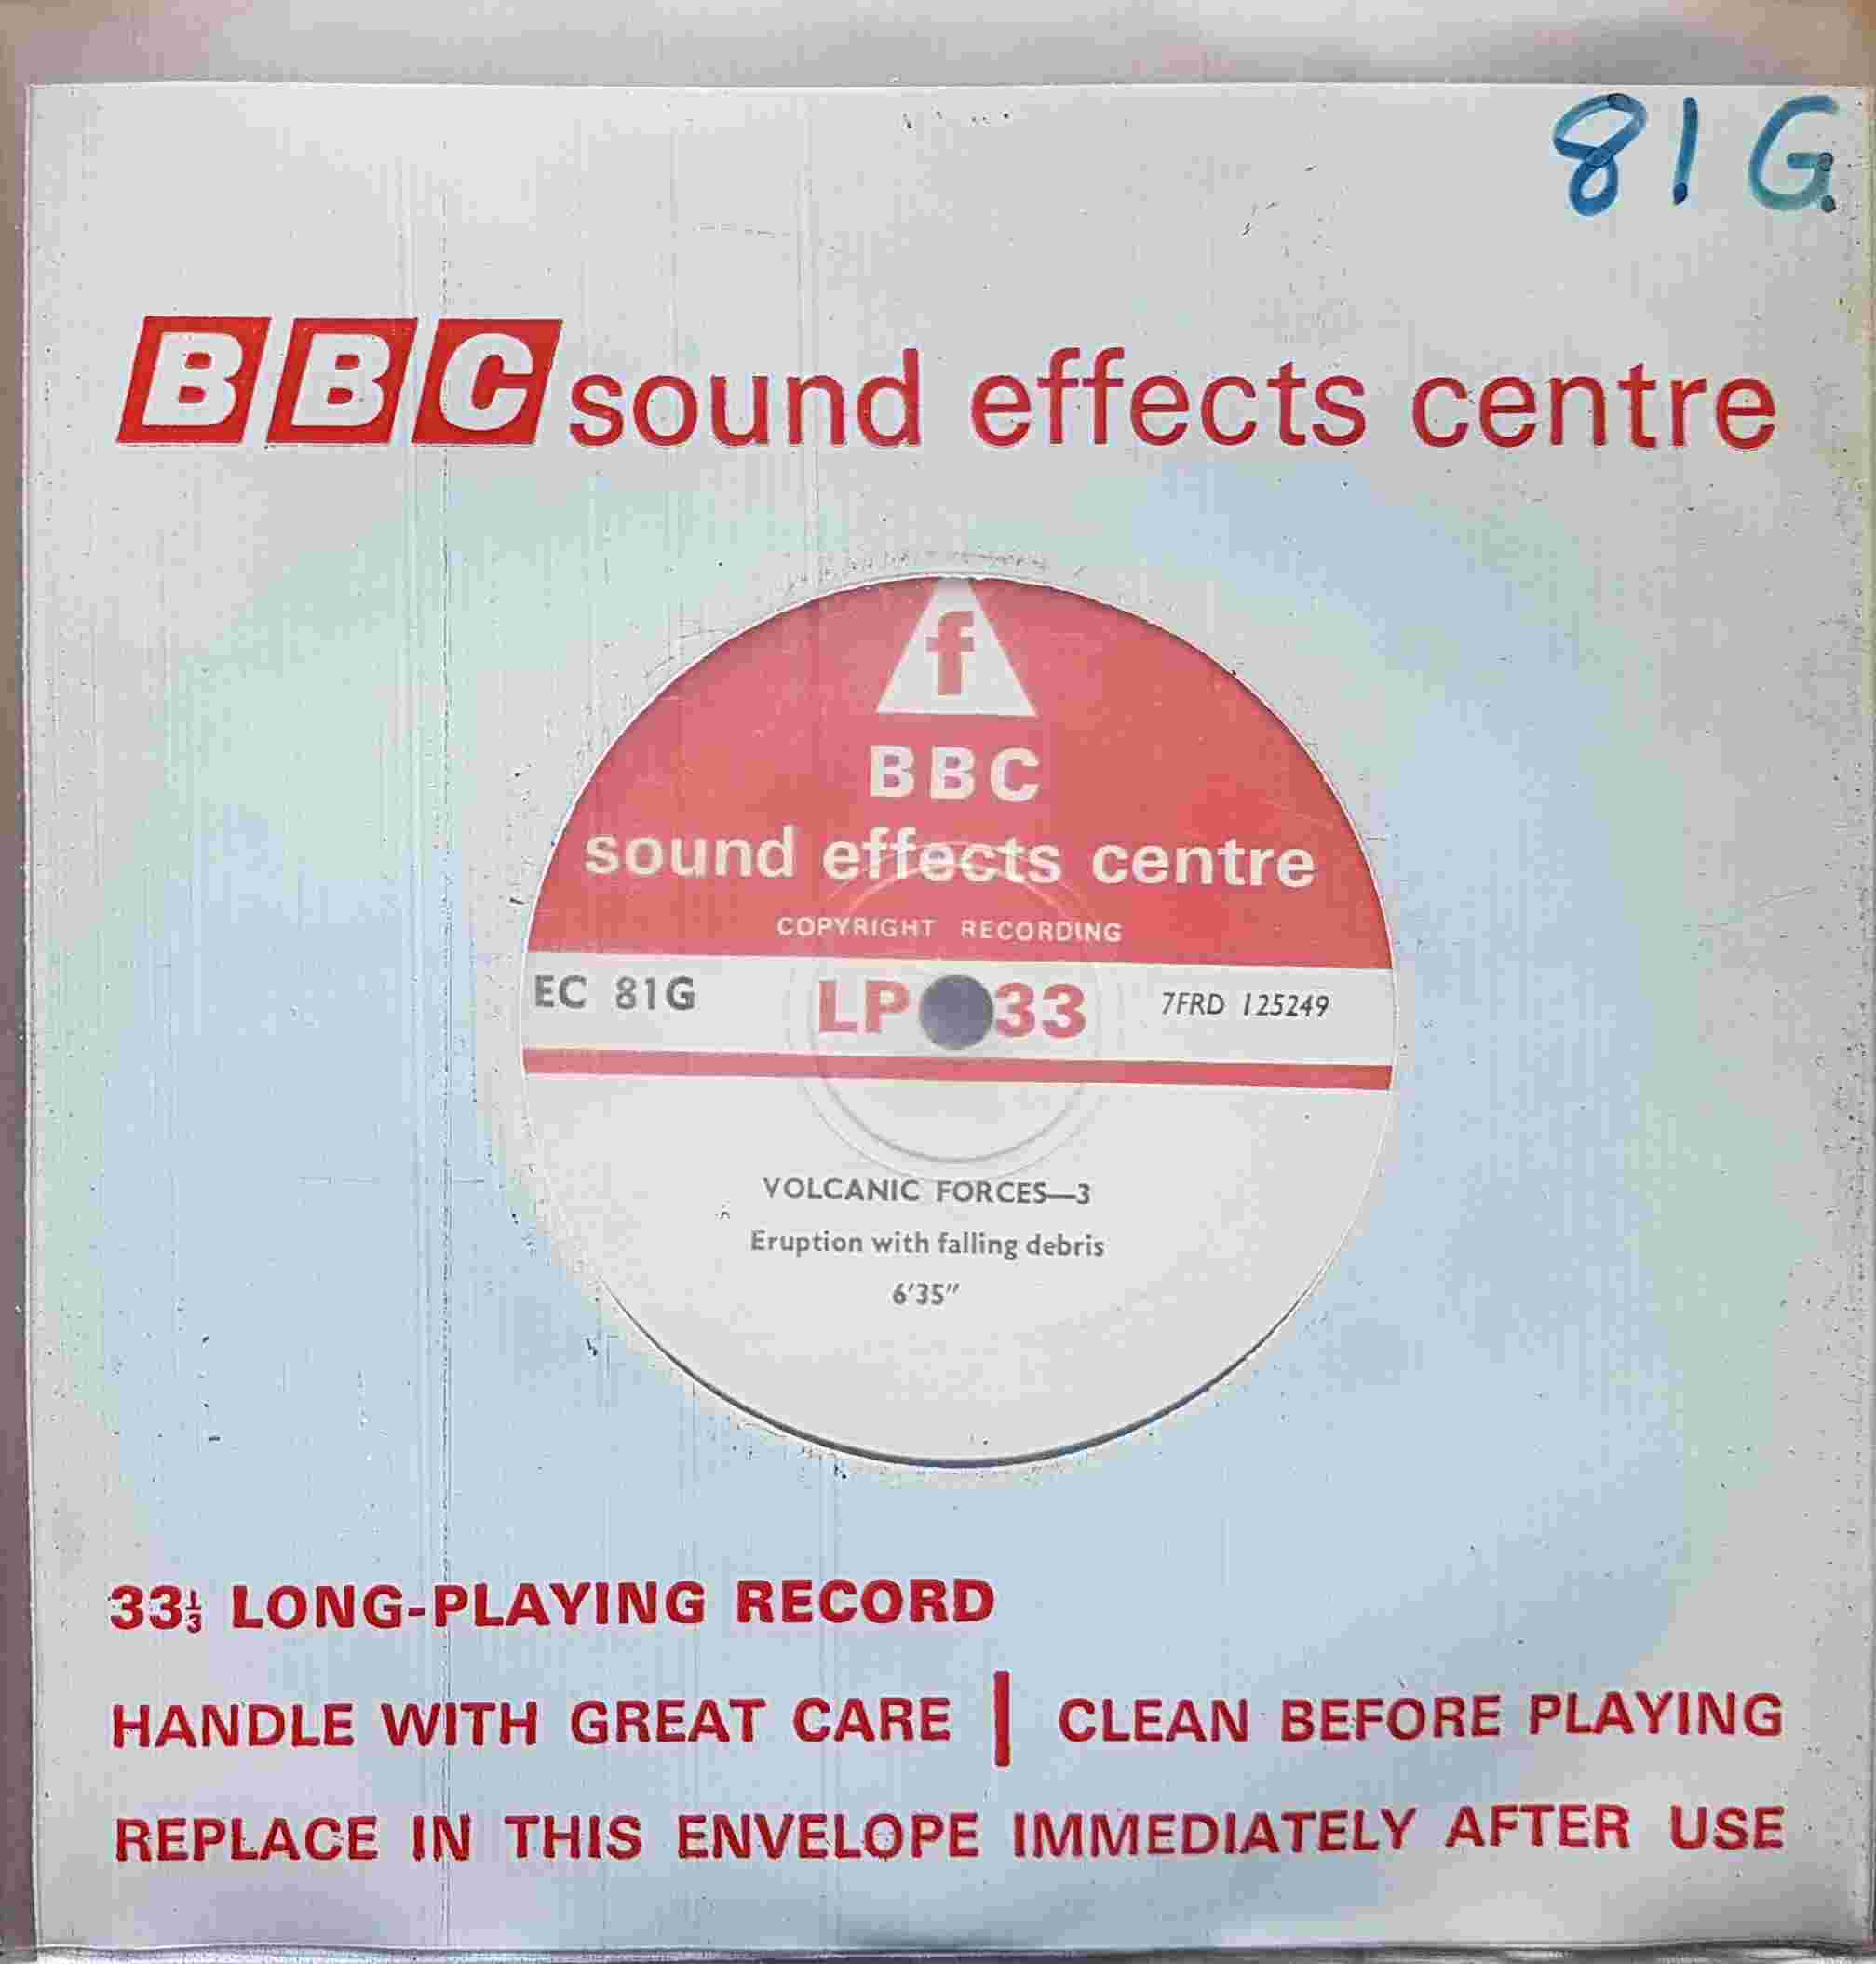 Picture of EC 81G Volcanic forces by artist Not registered from the BBC singles - Records and Tapes library